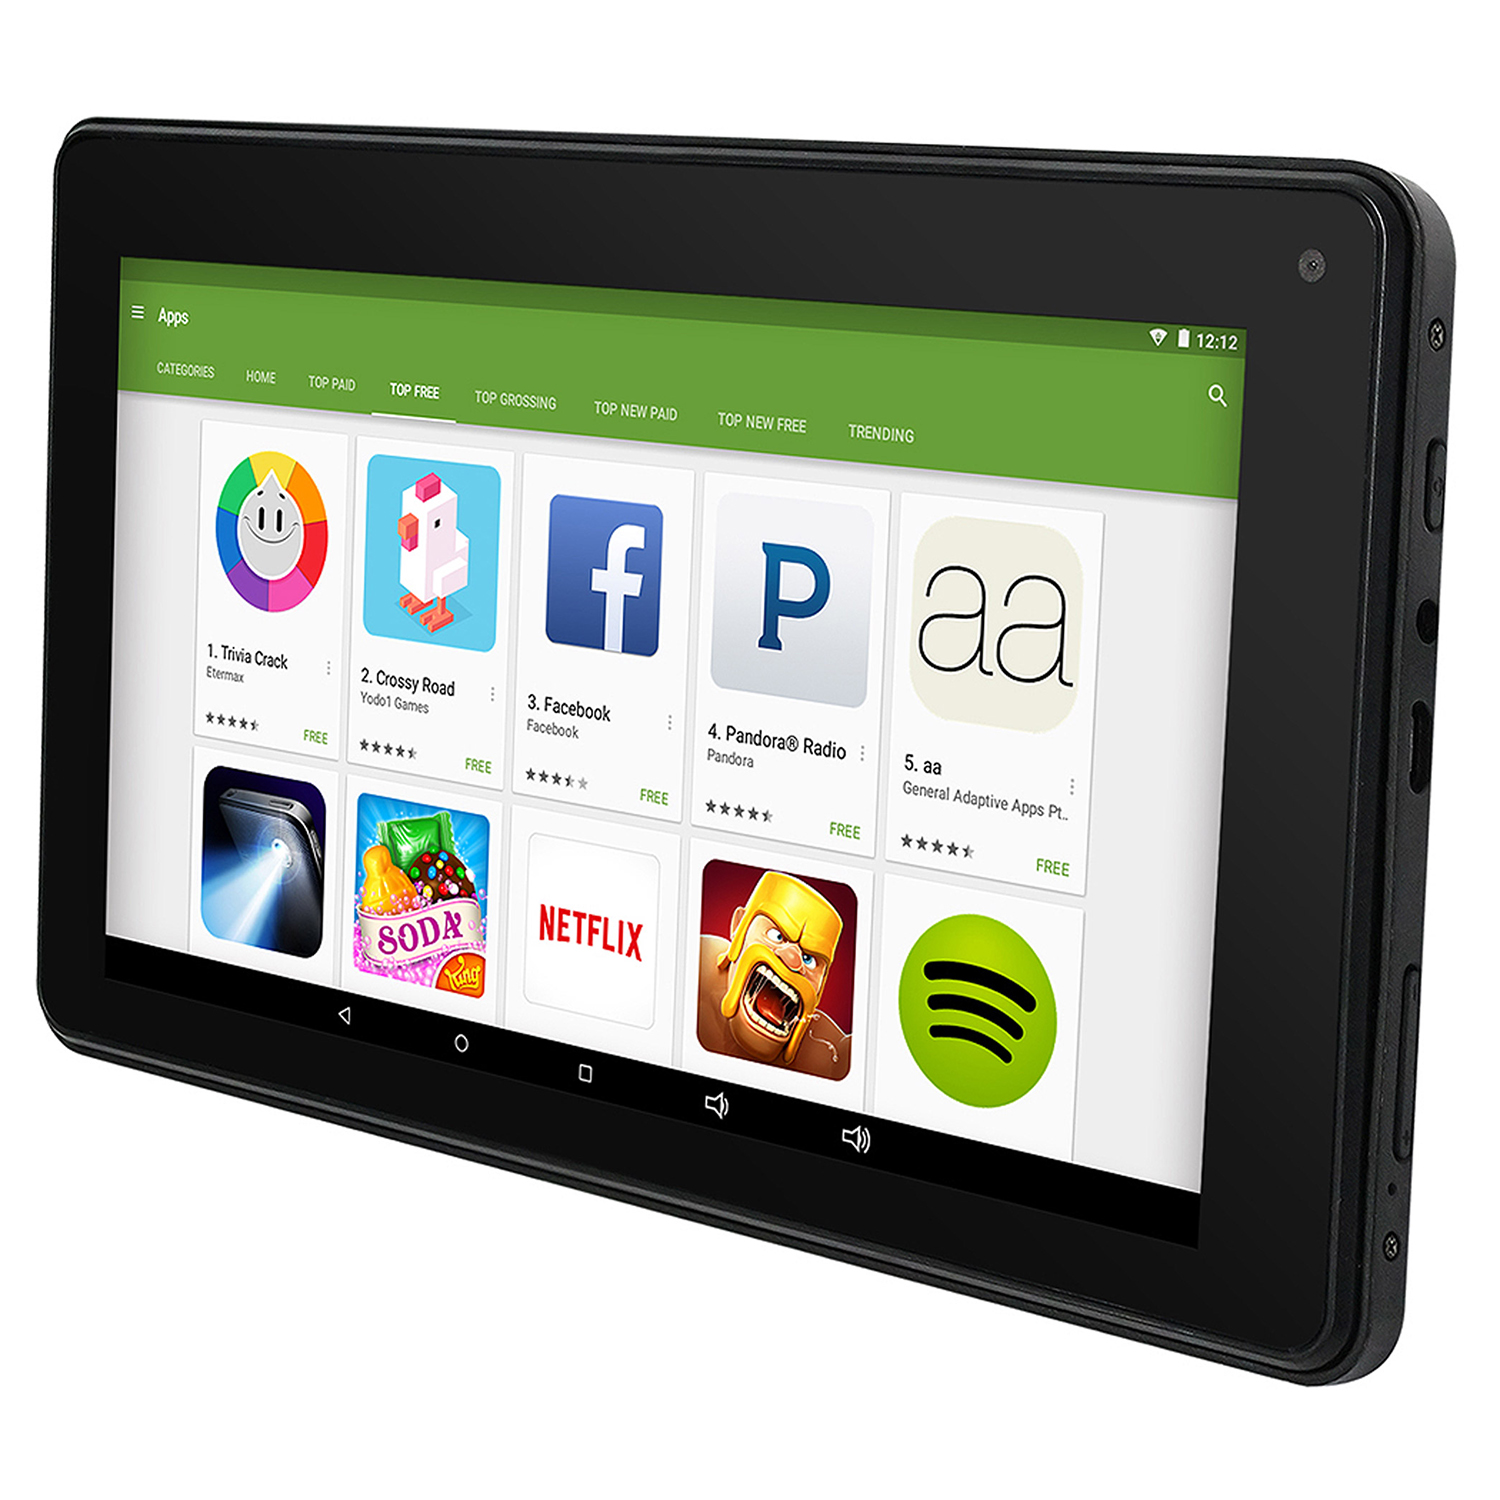 RCA 7 Voyager II - Tablet - Android 5.0 (Lollipop) - 8 GB - 7" (1024 x 600) - microSD slot - black - image 2 of 3